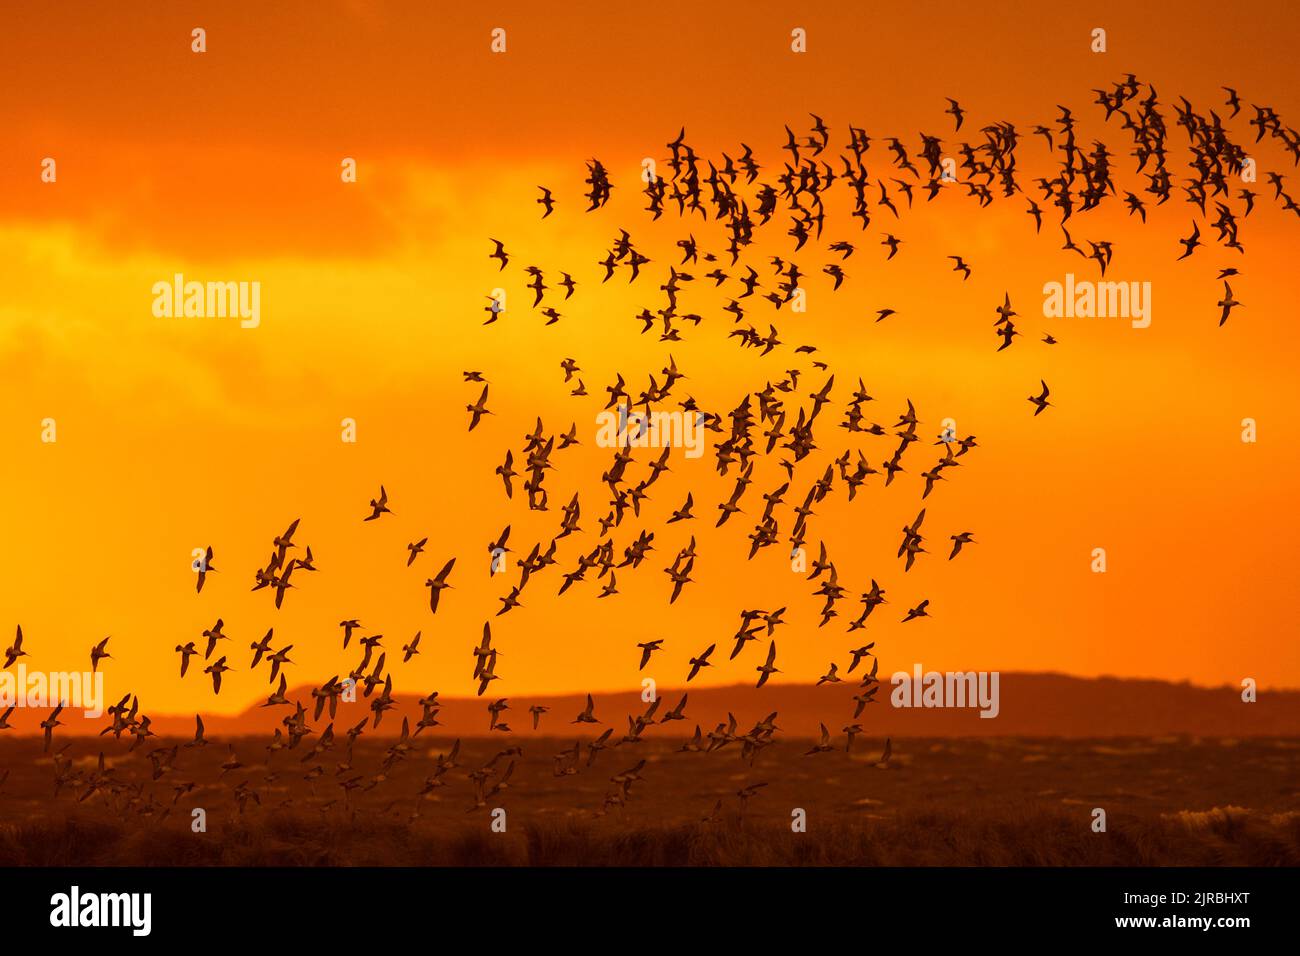 Huge flock of bar-tailed godwits (Limosa lapponica) and red knots in flight, silhouetted against orange sunset sky along the North Sea coast in spring Stock Photo